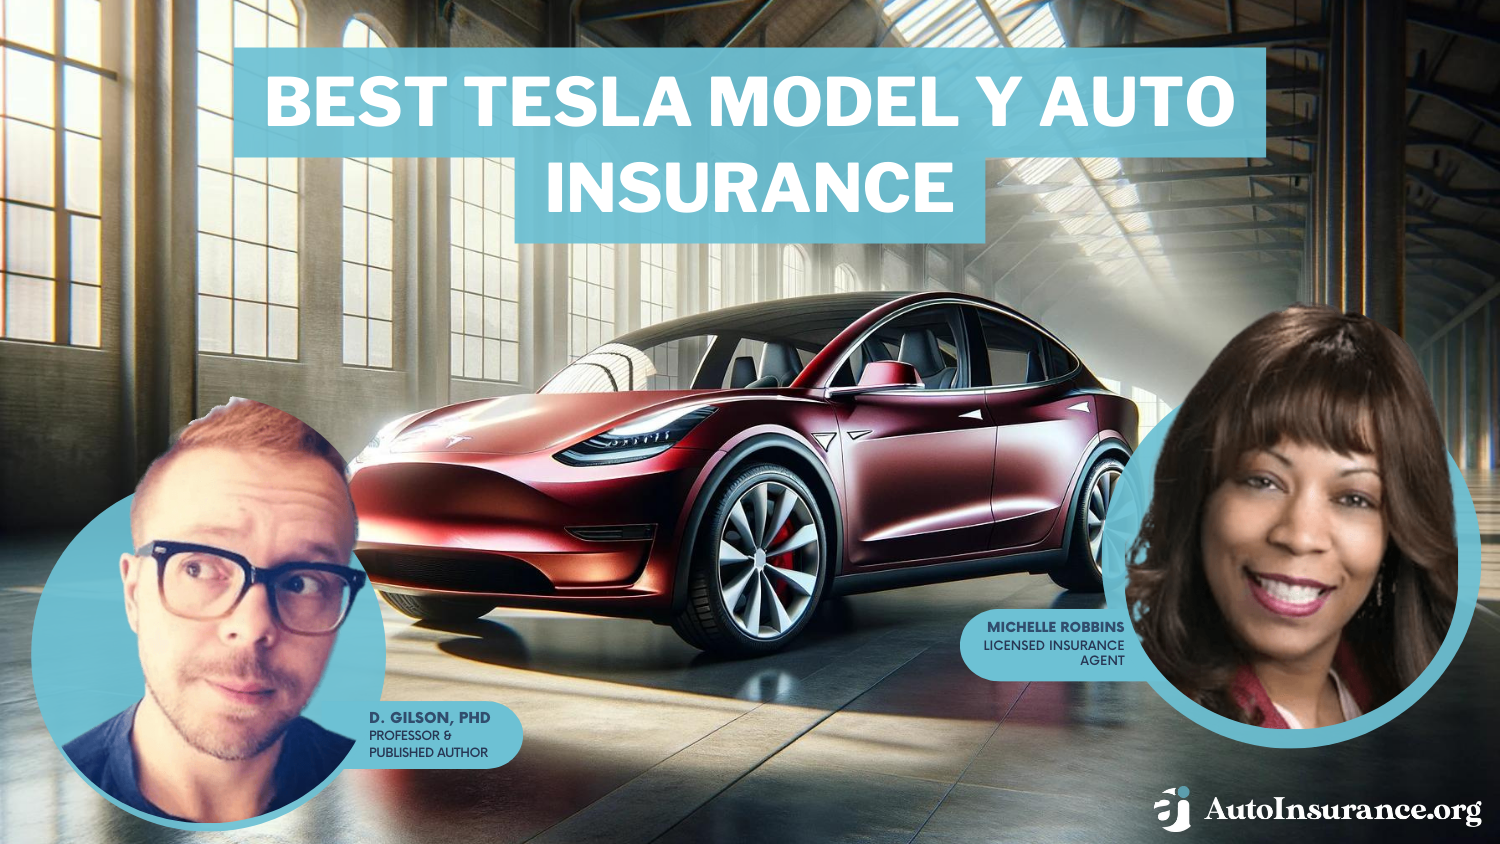 Best Tesla Model Y Auto Insurance: American Family, Nationwide, and Progressive